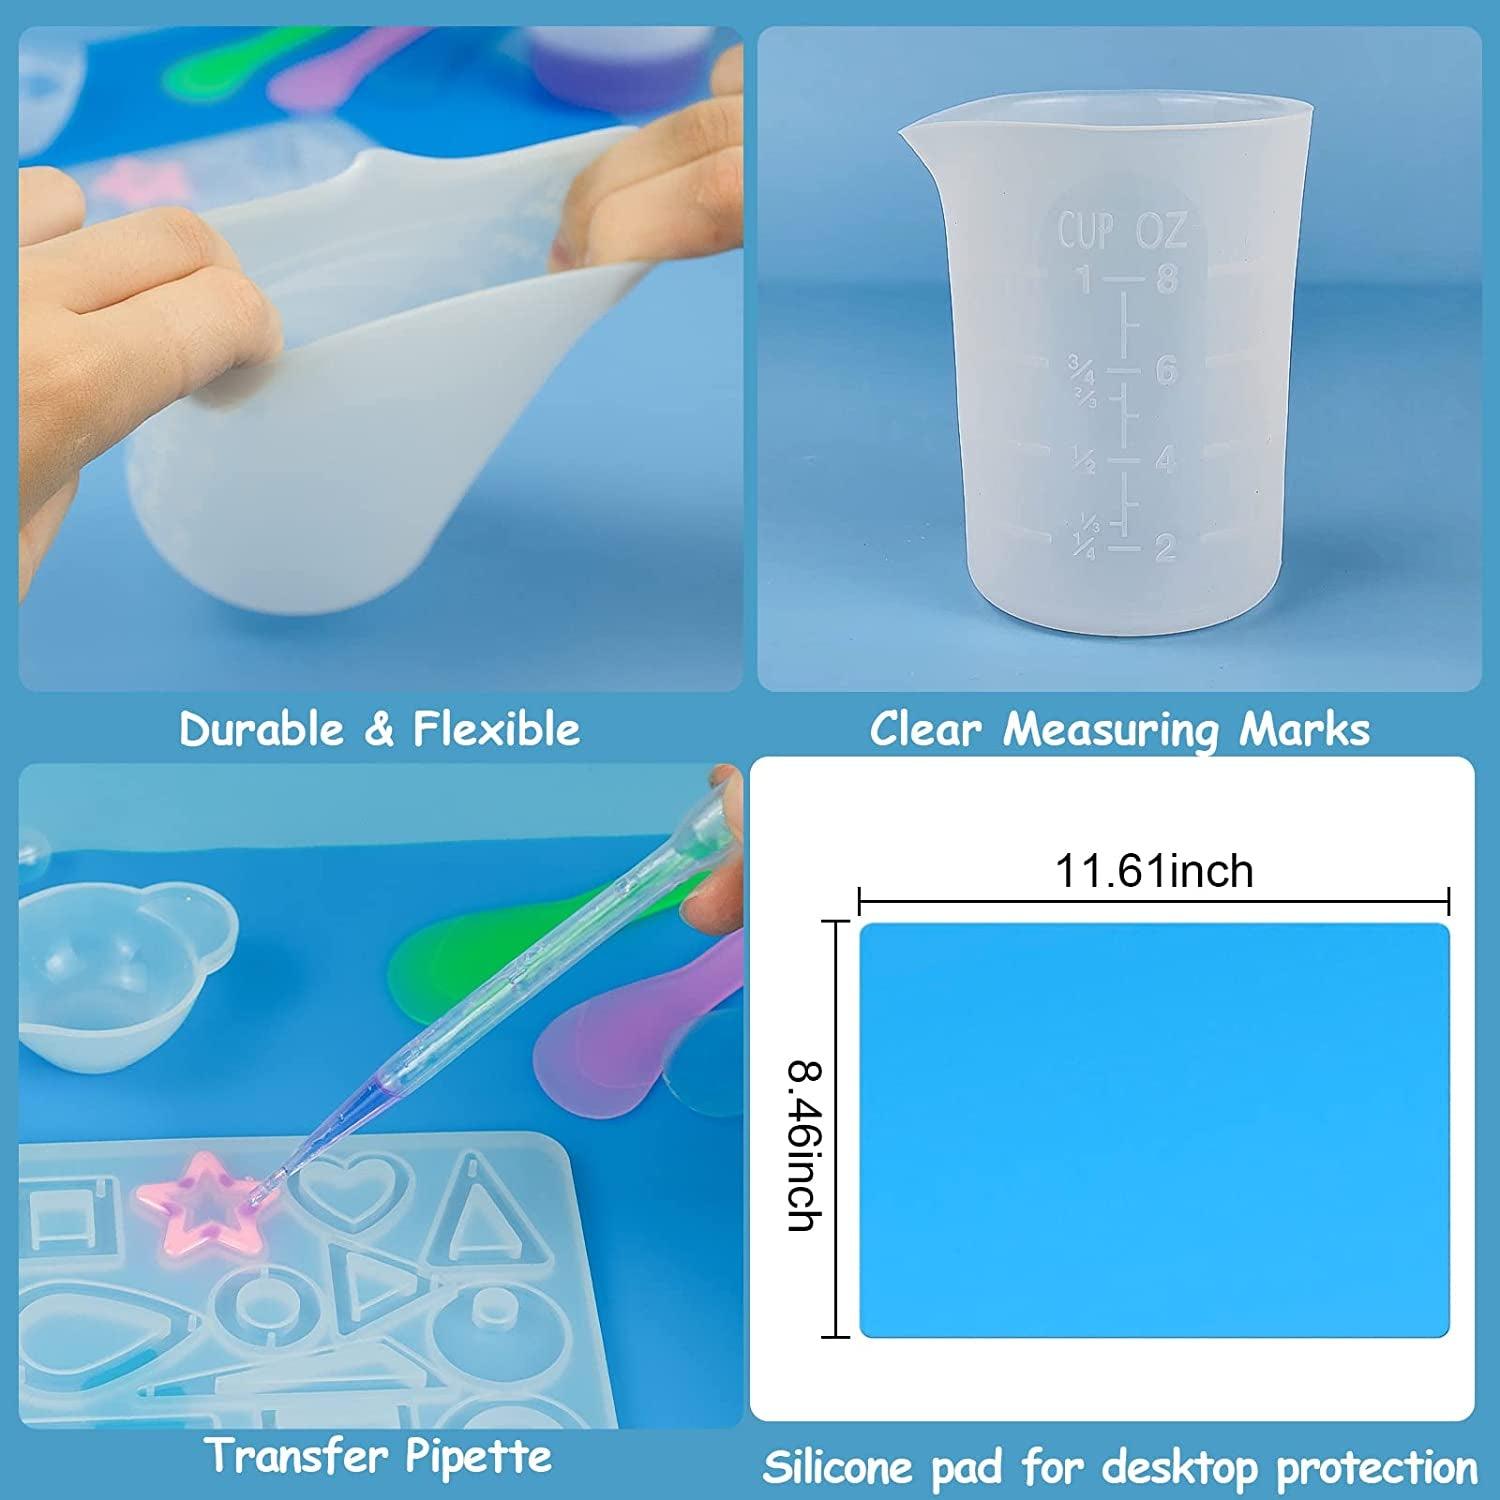 100ml Silicone Epoxy Resin Mixing Cups